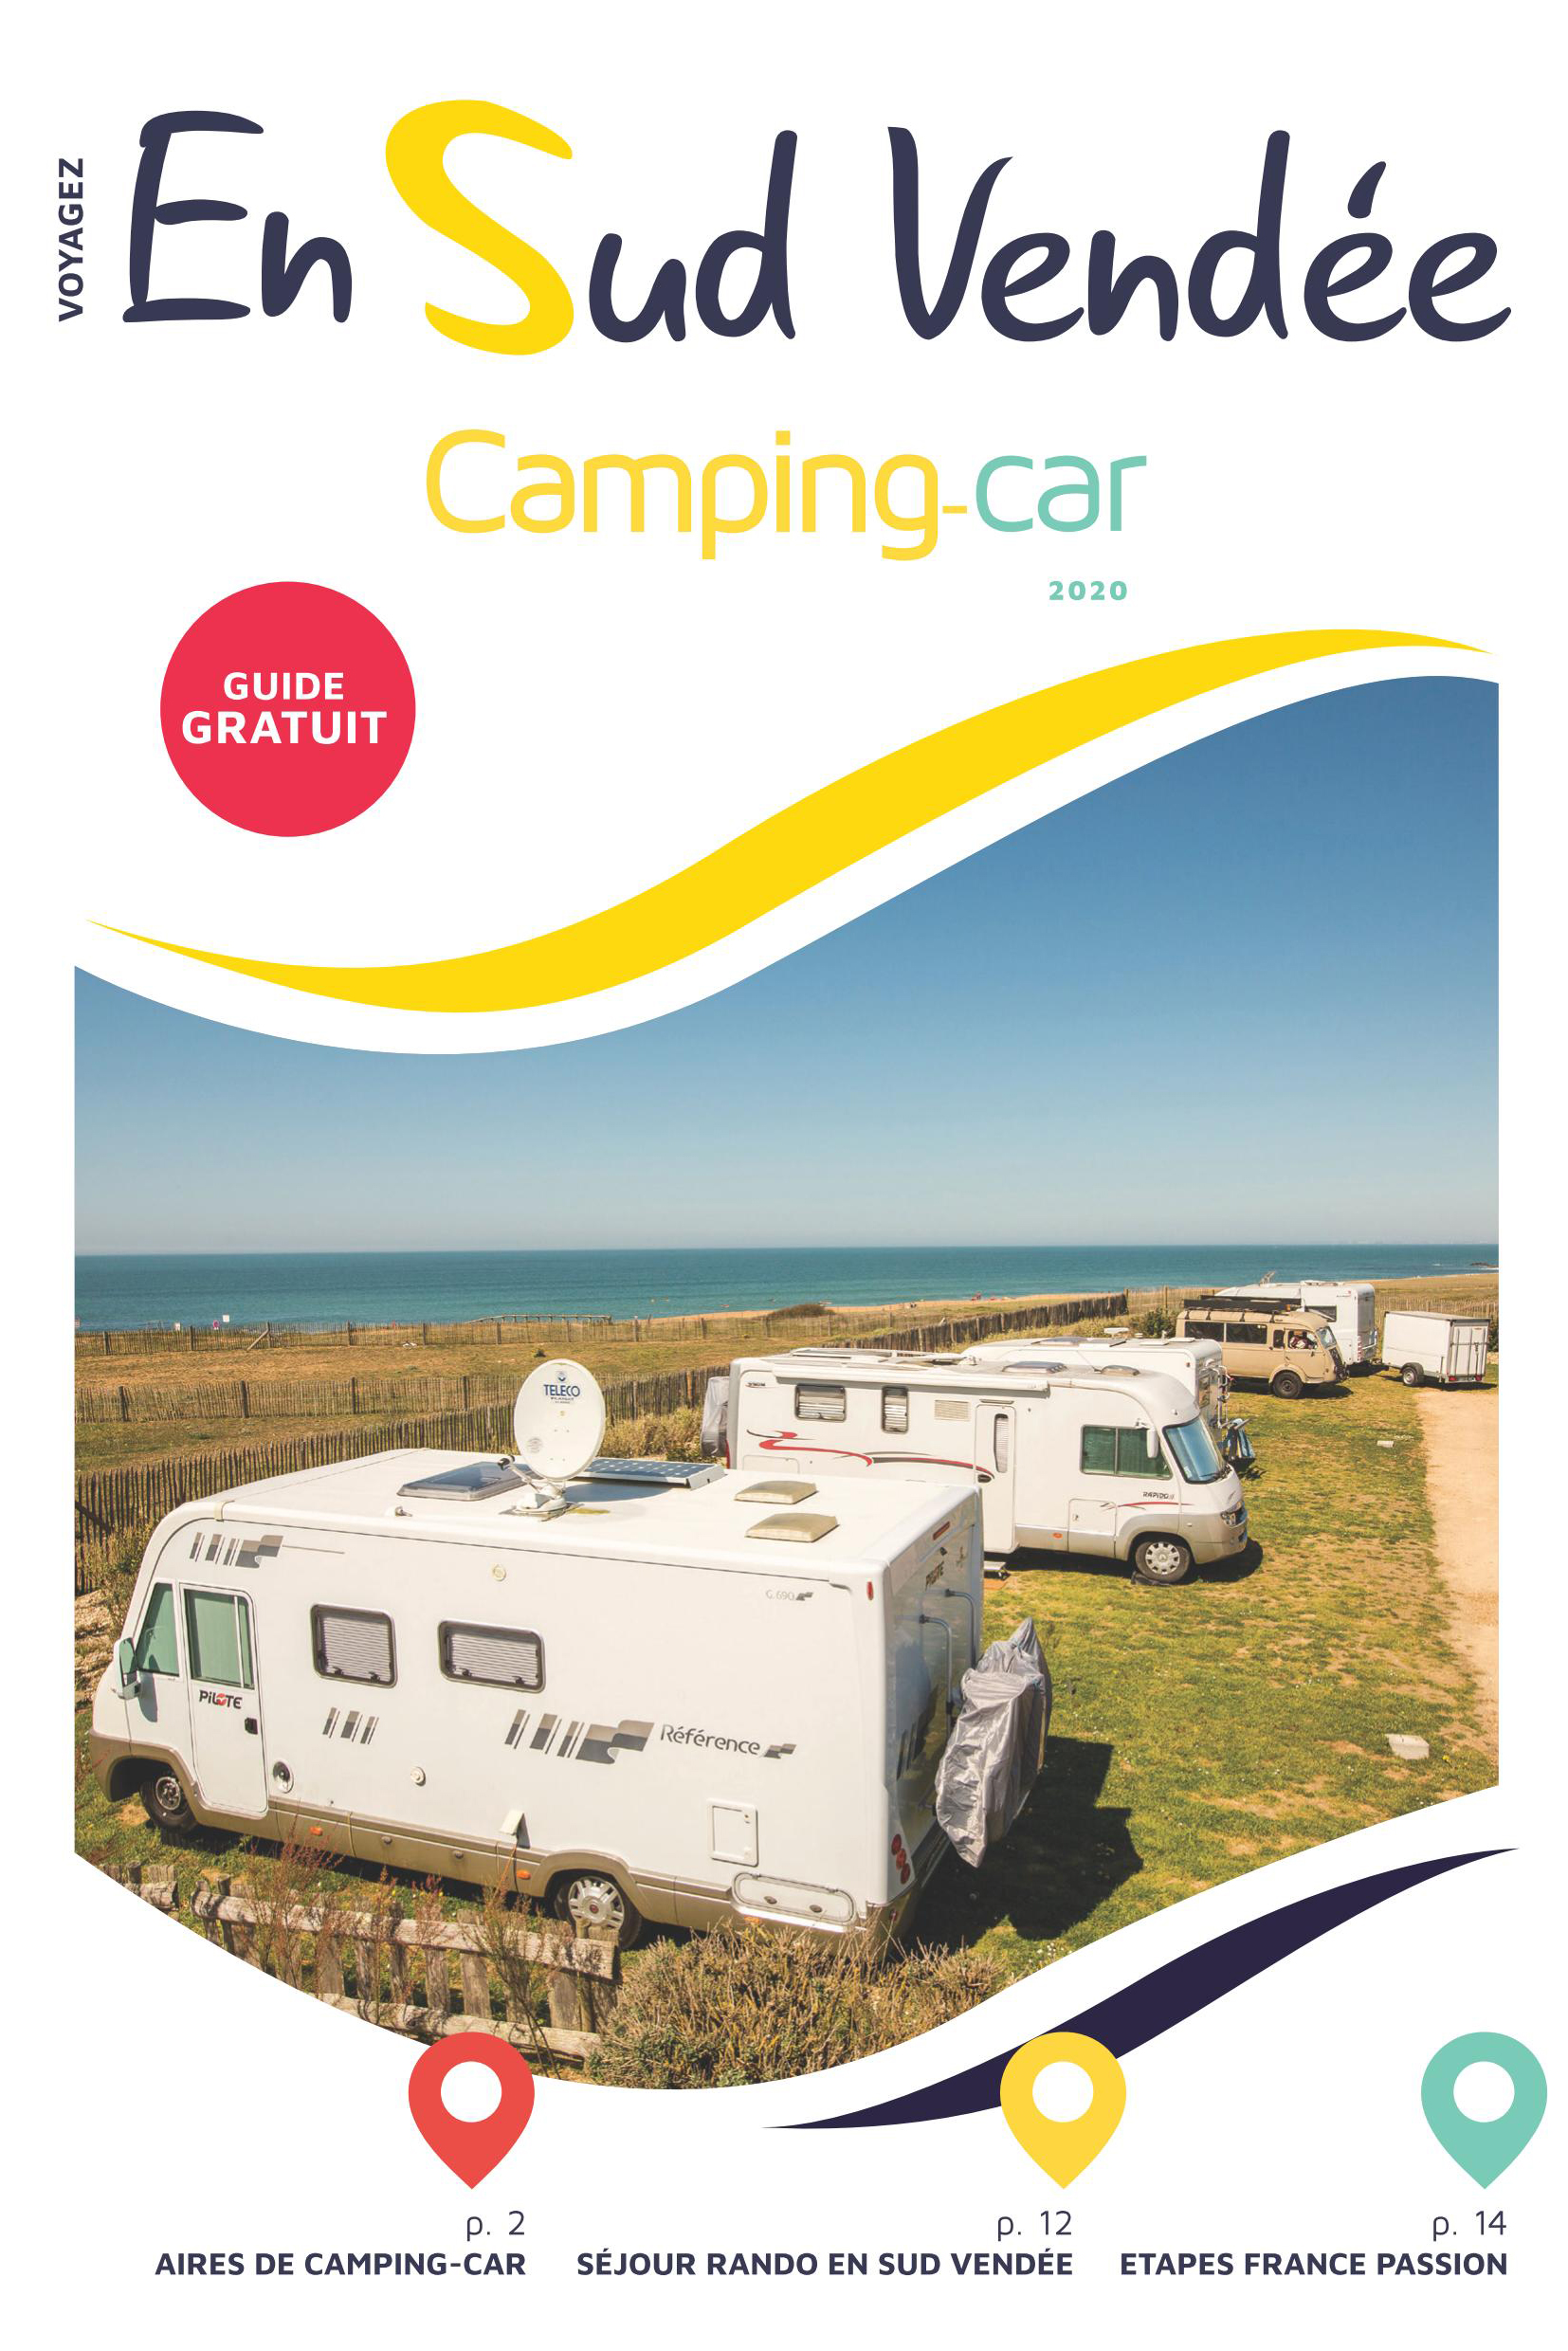 VOYAGE CAMPING CAR 2020 - SUD VENDEE